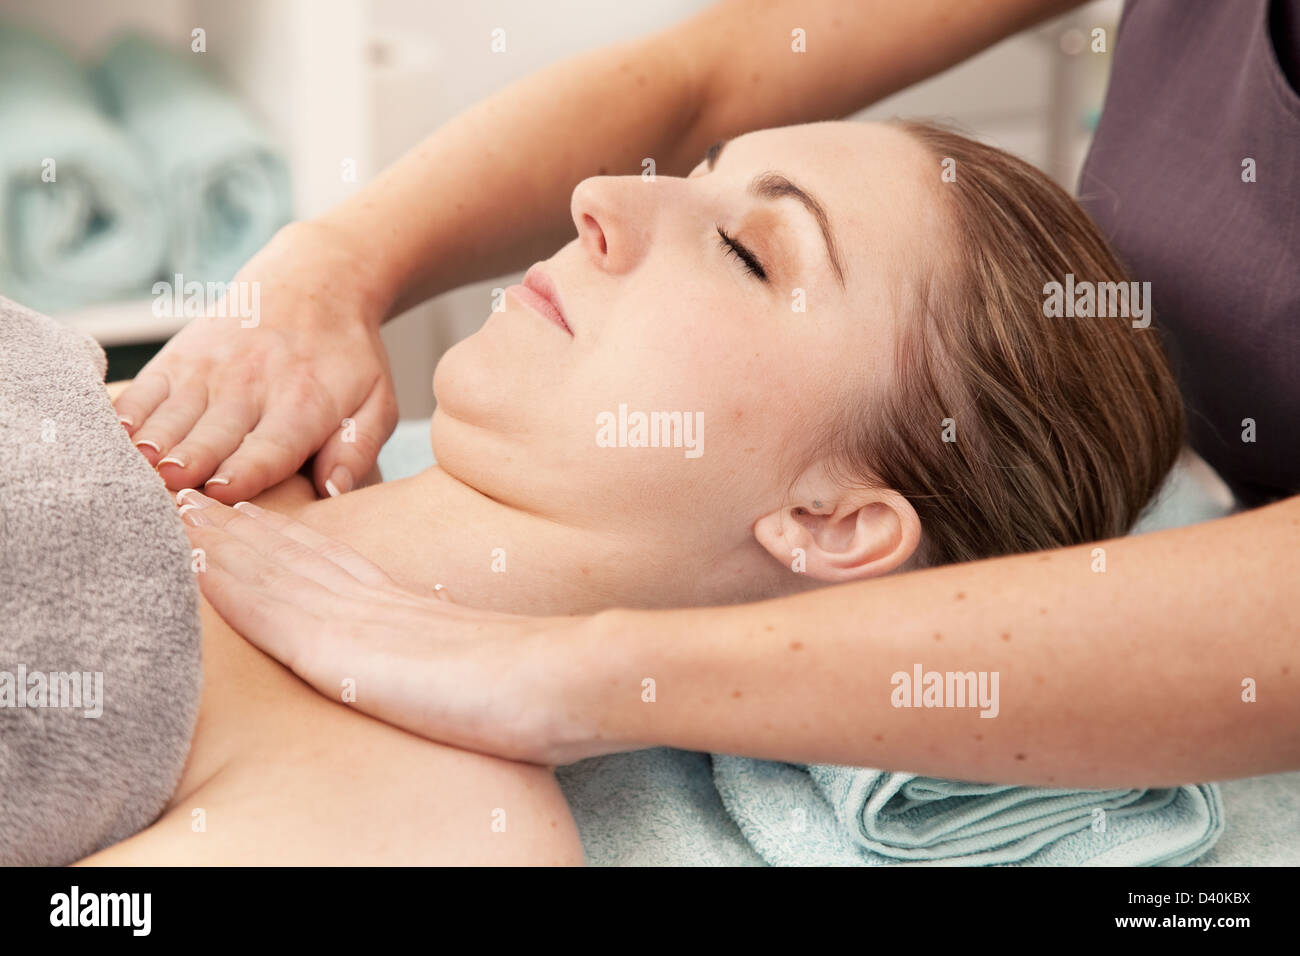 Masseuse massages the neck & shoulders of a woman - Stock Image - M740/0395  - Science Photo Library